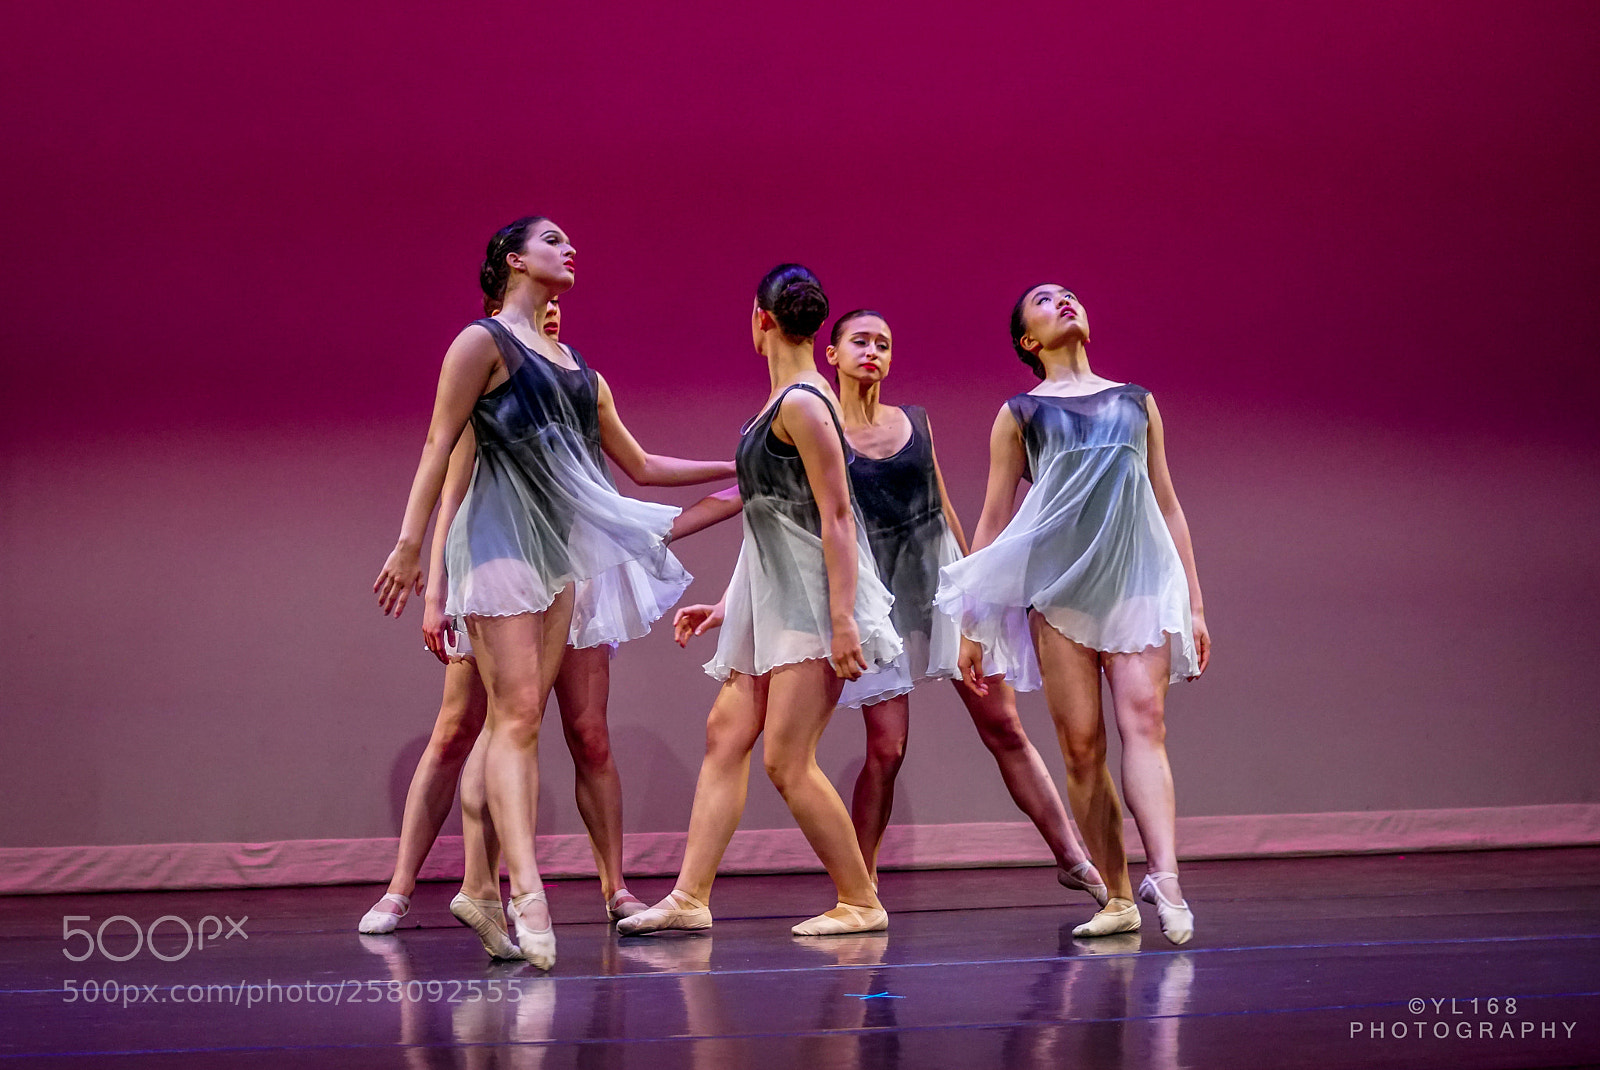 Sony a6500 sample photo. Dancers photography